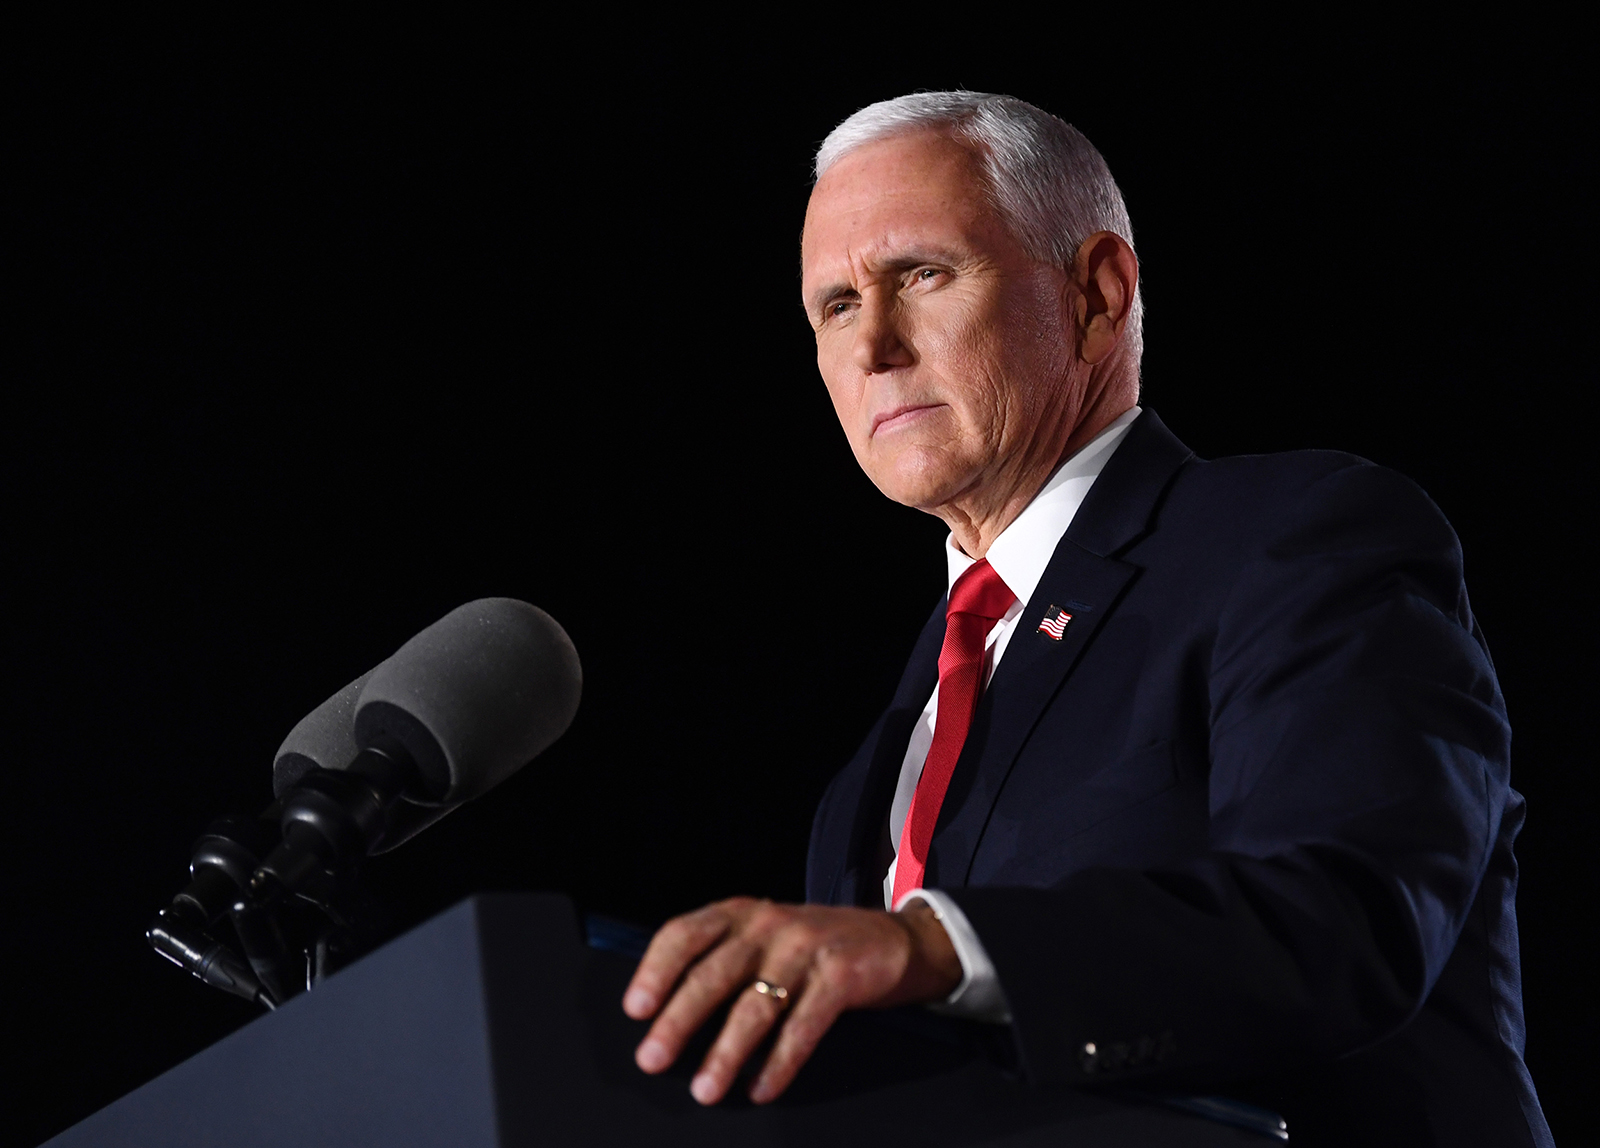 Vice President Mike Pence speaks on the third night of the Republican National Convention, at Ft. McHenry in Baltimore, Maryland on Wednesday, August 26.